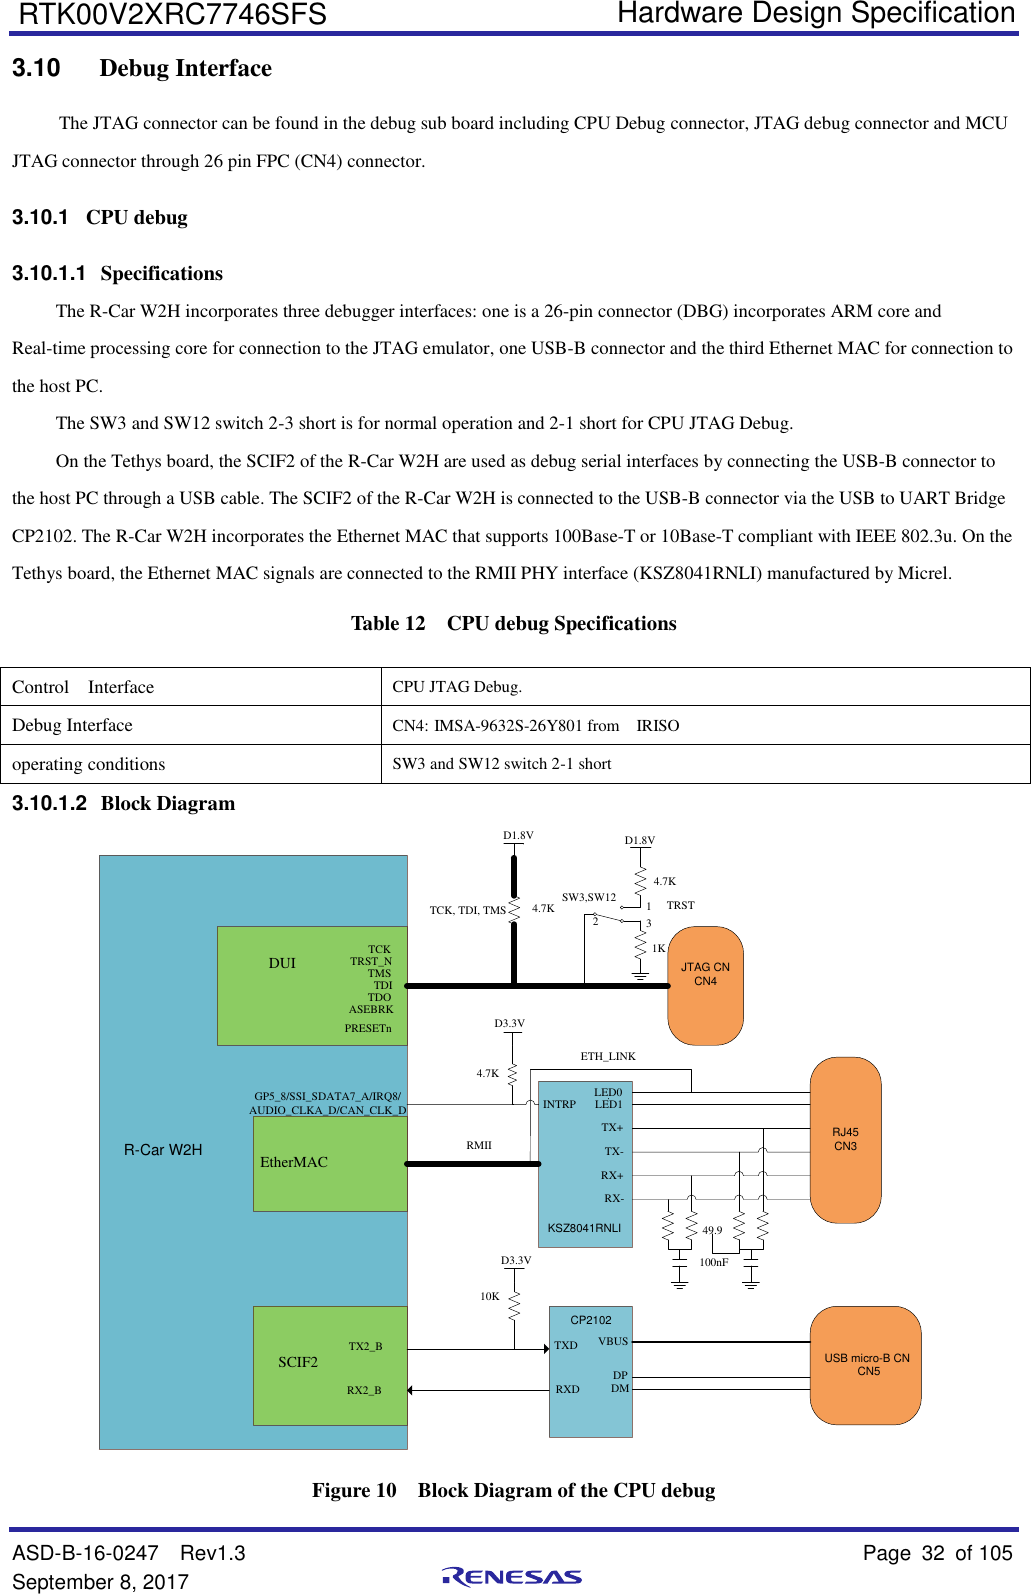   Hardware Design Specification ASD-B-16-0247  Rev1.3    Page 32  of 105 September 8, 2017      RTK00V2XRC7746SFS 3.10  Debug Interface The JTAG connector can be found in the debug sub board including CPU Debug connector, JTAG debug connector and MCU JTAG connector through 26 pin FPC (CN4) connector. 3.10.1  CPU debug 3.10.1.1  Specifications The R-Car W2H incorporates three debugger interfaces: one is a 26-pin connector (DBG) incorporates ARM core and Real-time processing core for connection to the JTAG emulator, one USB-B connector and the third Ethernet MAC for connection to the host PC. The SW3 and SW12 switch 2-3 short is for normal operation and 2-1 short for CPU JTAG Debug. On the Tethys board, the SCIF2 of the R-Car W2H are used as debug serial interfaces by connecting the USB-B connector to the host PC through a USB cable. The SCIF2 of the R-Car W2H is connected to the USB-B connector via the USB to UART Bridge CP2102. The R-Car W2H incorporates the Ethernet MAC that supports 100Base-T or 10Base-T compliant with IEEE 802.3u. On the Tethys board, the Ethernet MAC signals are connected to the RMII PHY interface (KSZ8041RNLI) manufactured by Micrel. Table 12  CPU debug Specifications Control    Interface CPU JTAG Debug. Debug Interface CN4: IMSA-9632S-26Y801 from    IRISO operating conditions SW3 and SW12 switch 2-1 short 3.10.1.2  Block Diagram R-Car W2HD1.8VTCK, TDI, TMSJTAG CNCN449.9DUI TCKTRST_NTDITMSTDOASEBRKPRESETnEtherMACINTRPRMIID3.3VTX-TX+RX+RX-100nFLED1LED0ETH_LINKRJ45CN3KSZ8041RNLIDPDMRXDTXD VBUSUSB micro-B CN CN5SCIF2 TX2_BRX2_BD3.3V10K4.7KCP2102GP5_8/SSI_SDATA7_A/IRQ8/AUDIO_CLKA_D/CAN_CLK_DD1.8VTRST4.7K4.7K1K213SW3,SW12 Figure 10  Block Diagram of the CPU debug 